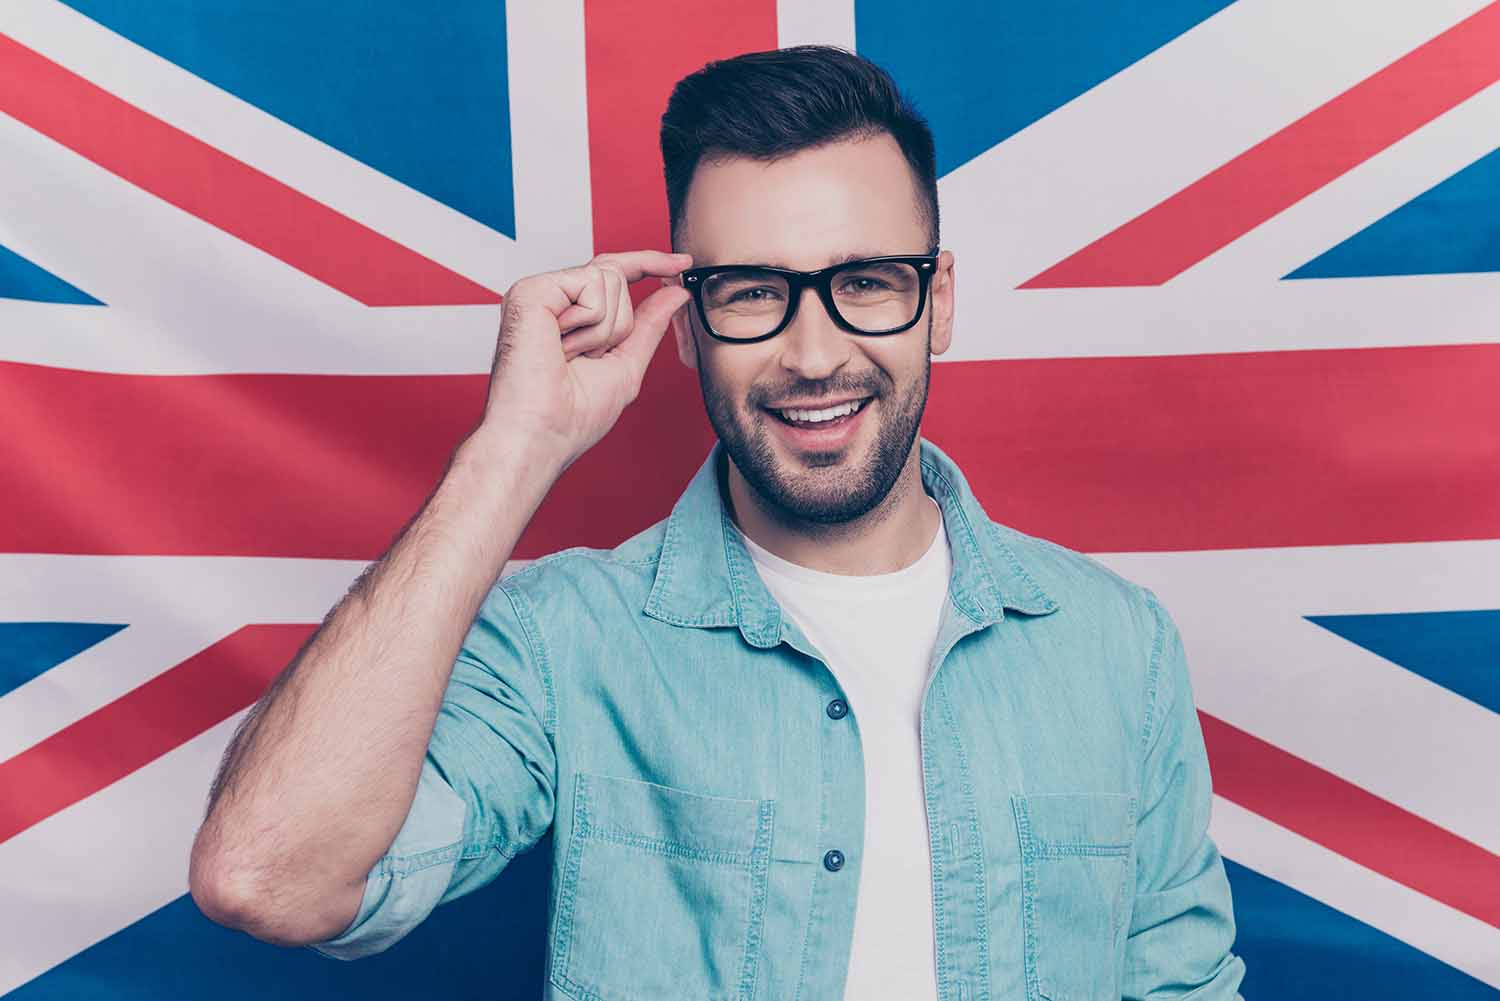 You got 25 out of 25! If You Can Get 20/25 on This European Flags Quiz, You’re Clearly the “Smart Friend” In Your Circle